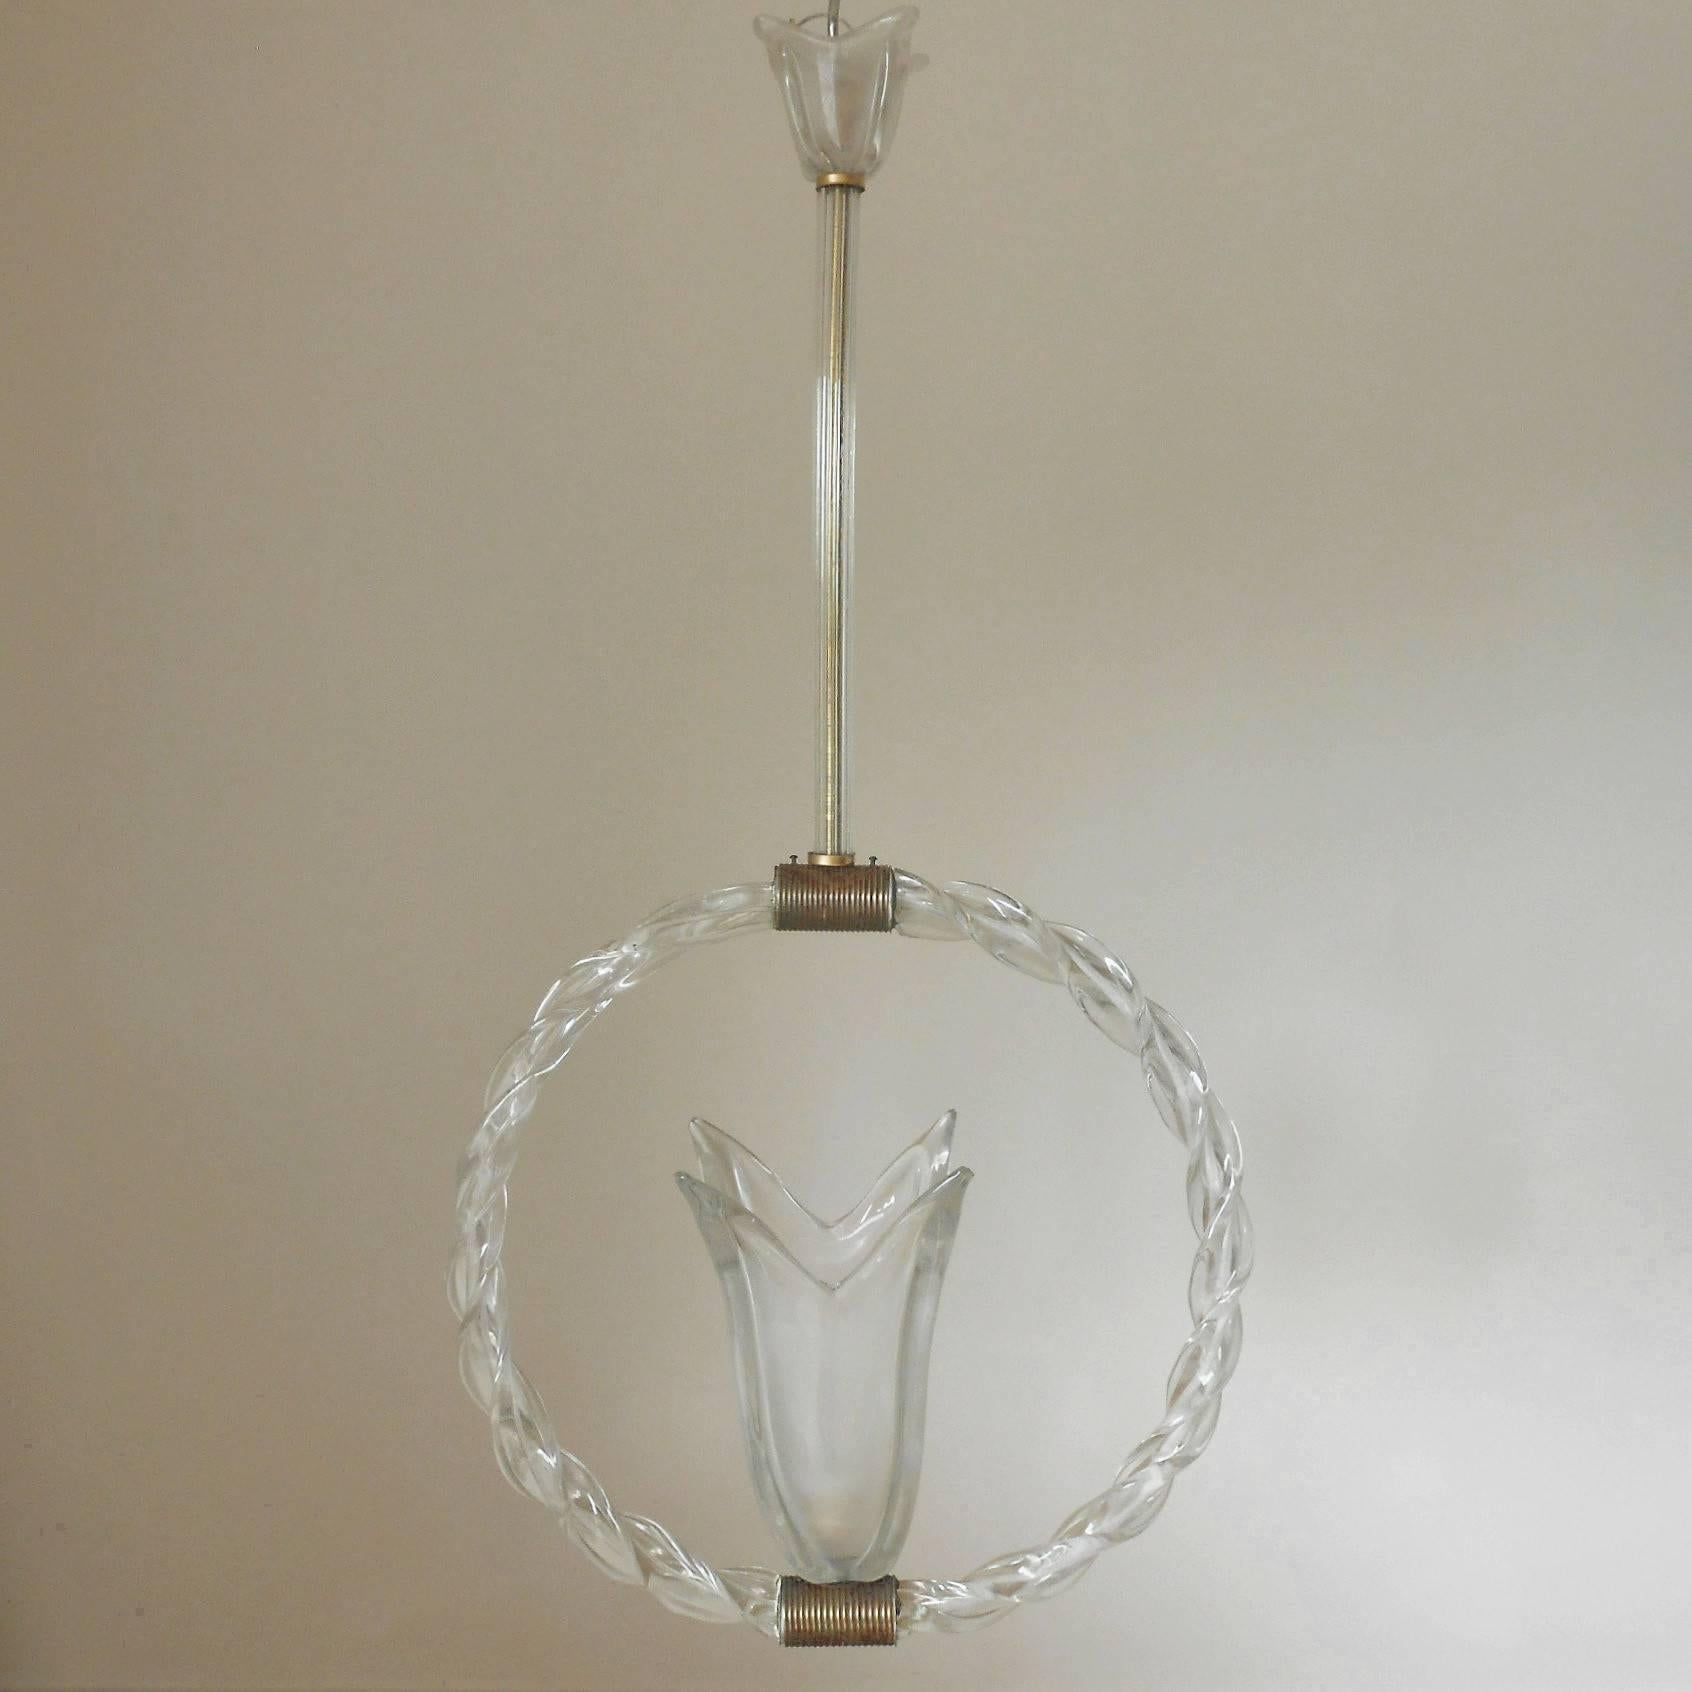 Vintage Italian pendant with a frosted Murano glass tulip surrounded by a twisted glass circle, glass rod and tulip shaped glass canopy, mounted with ribbed brass hardware / Designed by Ercole Barovier circa 1950’s / Made in Italy
1 light / E26 or